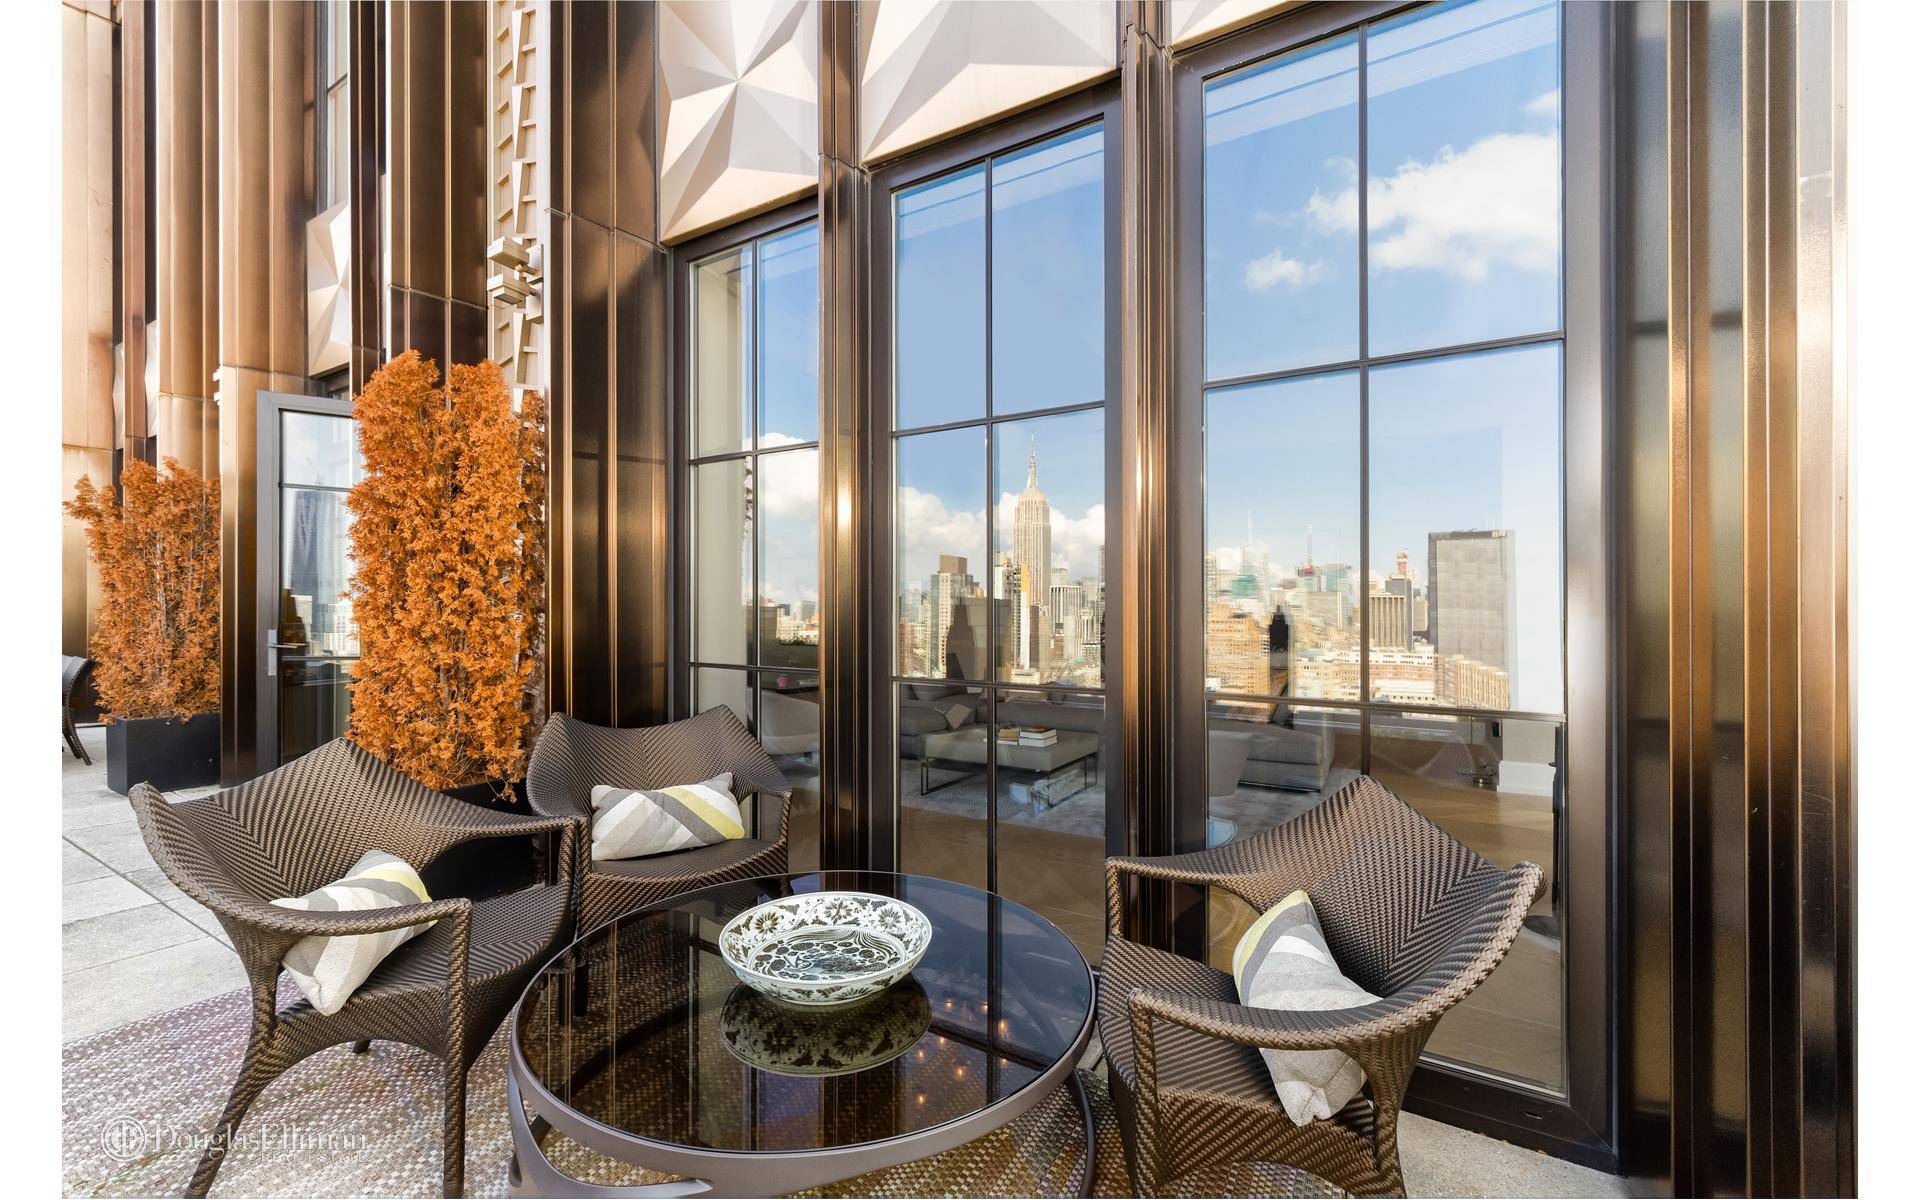 Penthouse Two PH2 at Walker Tower is an unparalleled full floor residence of grand proportions, masterfully designed by Ralph Walker.